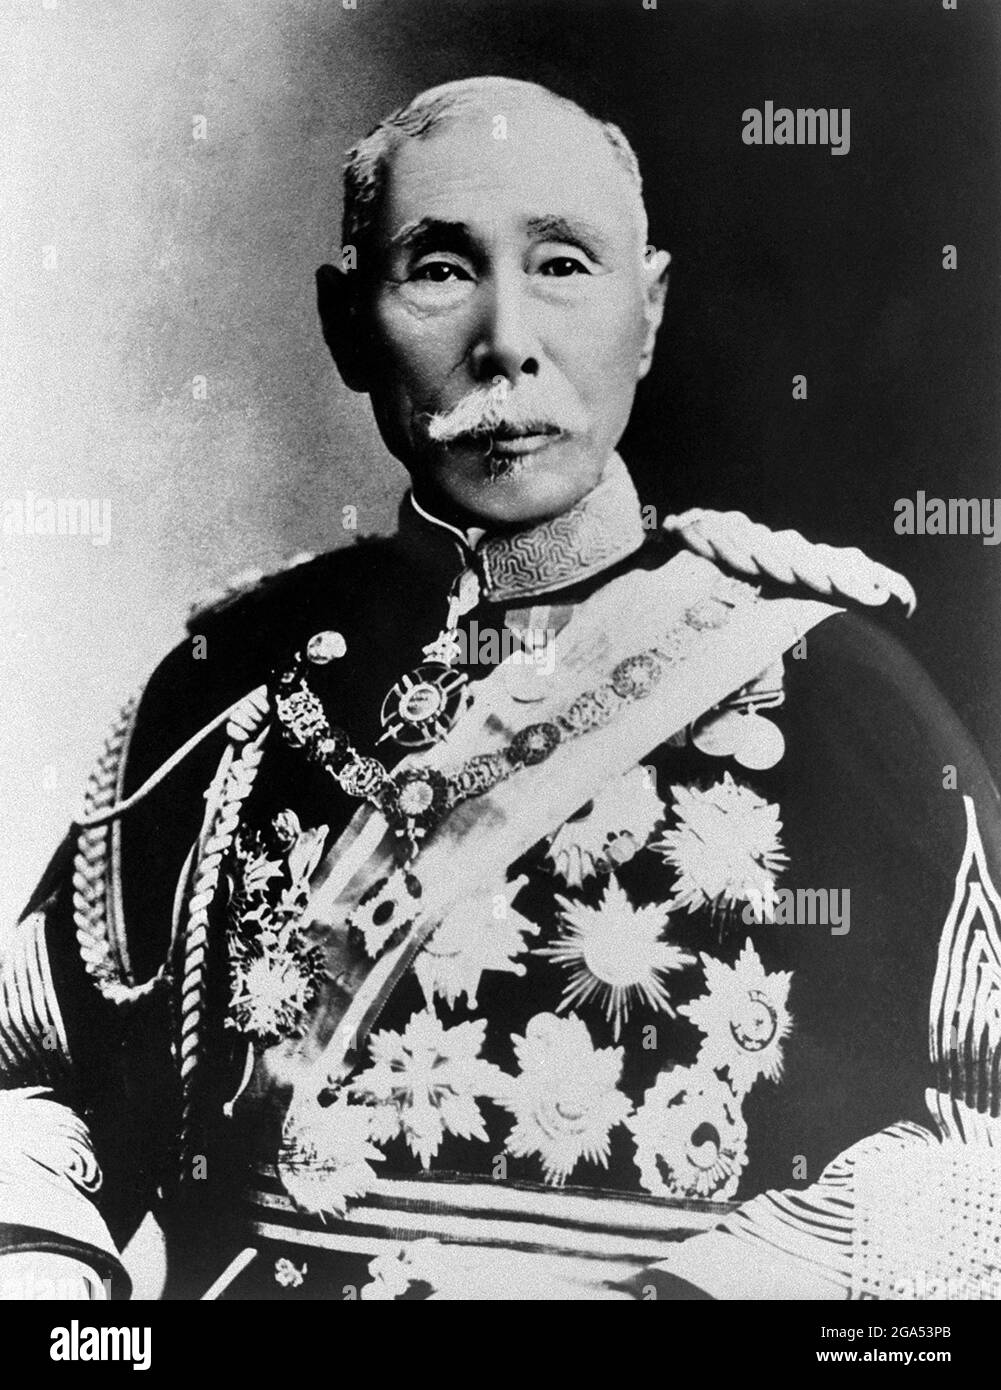 Japan: Aritomo Yamagata  (14 June 1838 – 1 February 1922), Prime Minister of Japan from 1909 to 1922.  Prince Yamagata Aritomo, also known as Yamagata Kyōsuke, was a Japanese field marshal, twice-elected Prime Minister of Japan, and one of the leaders of the Meiji oligarchy. As the Imperial Japanese Army’s inaugural Chief of Staff, he was the main architect of the military foundation of early modern Japan. Stock Photo